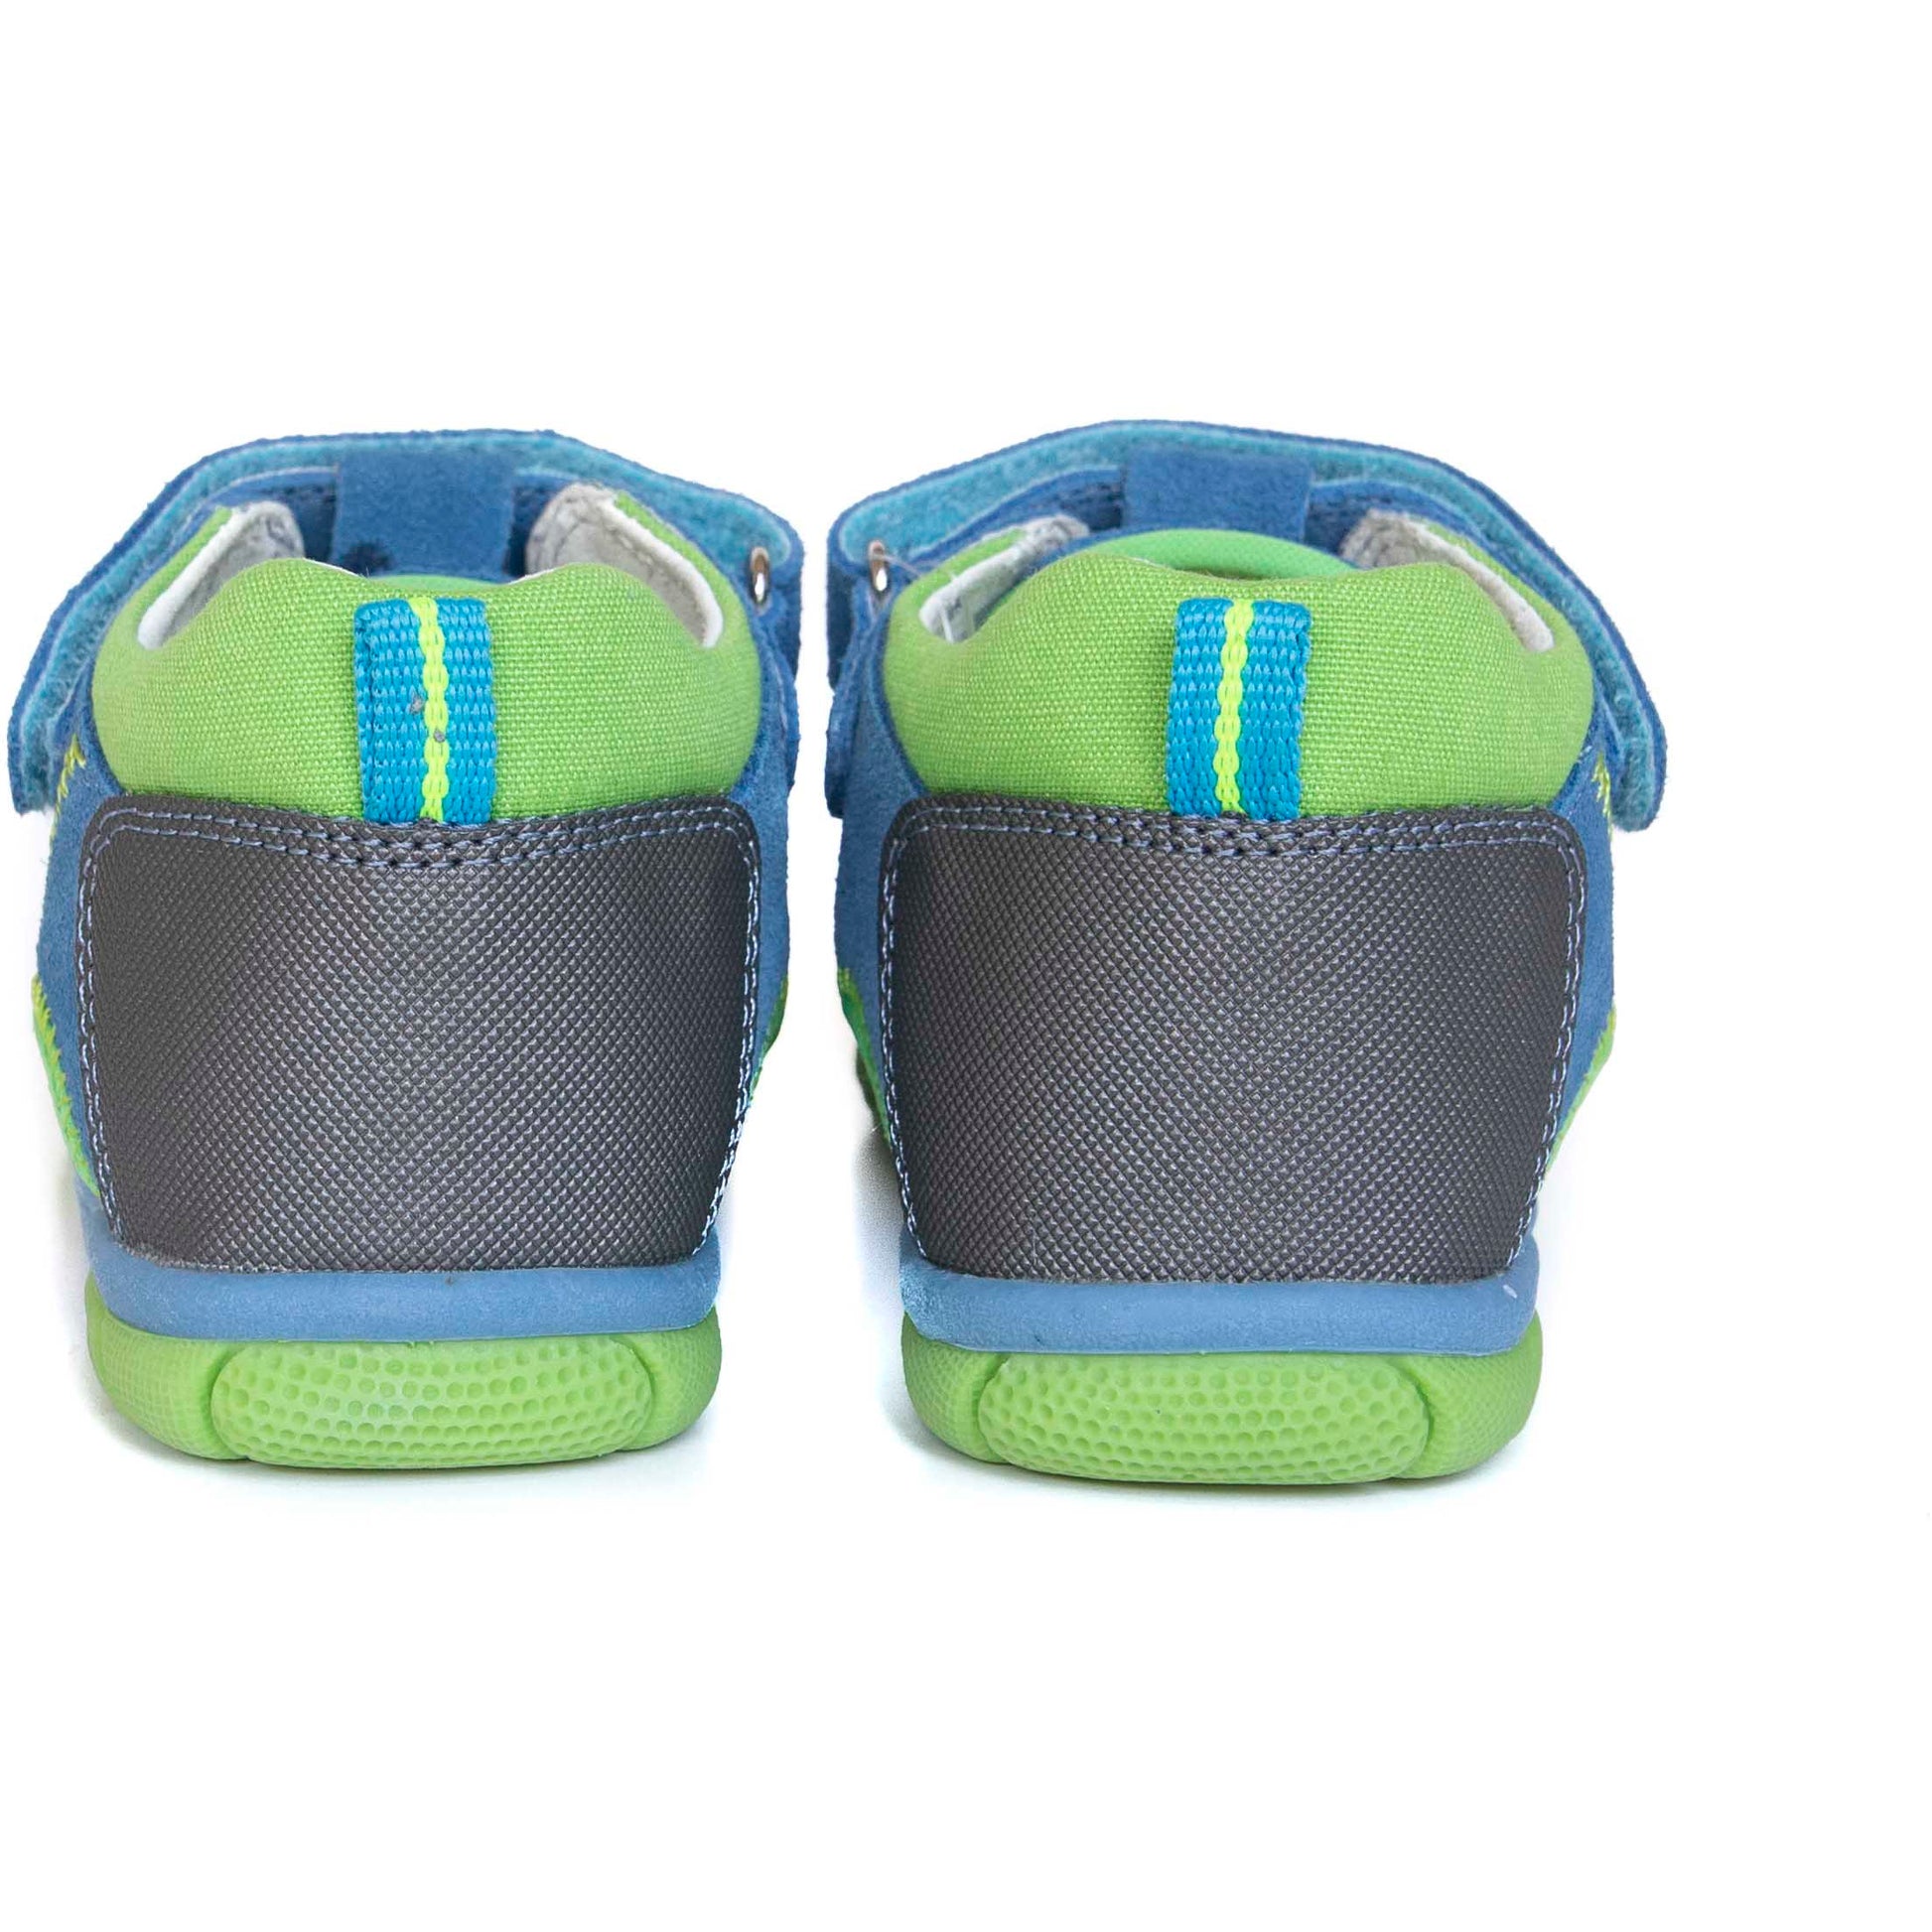 STOLER blue toddler boy arch support sandals - feelgoodshoes.ae